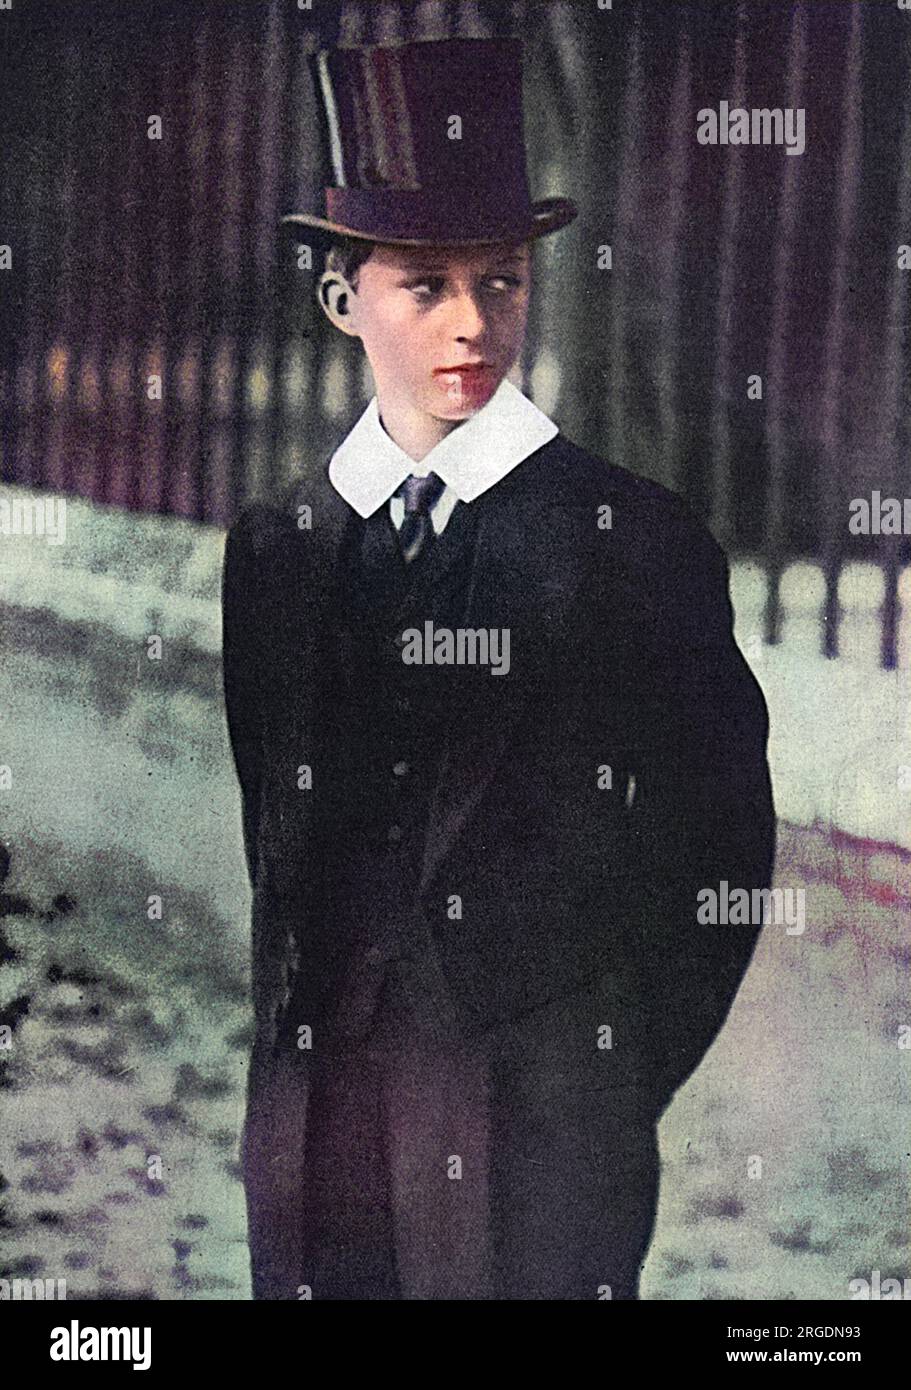 The Duke of Brabant, later King Leopold III (1901-1983), eldest son of Albert I, King of the Belgians.   Pictured as an Eton school boy - he attended Eton College during the First World War when the Belgian royal children stayed in England.  His contemporary at the school was Prince Henry, later Duke of Gloucester. Stock Photo